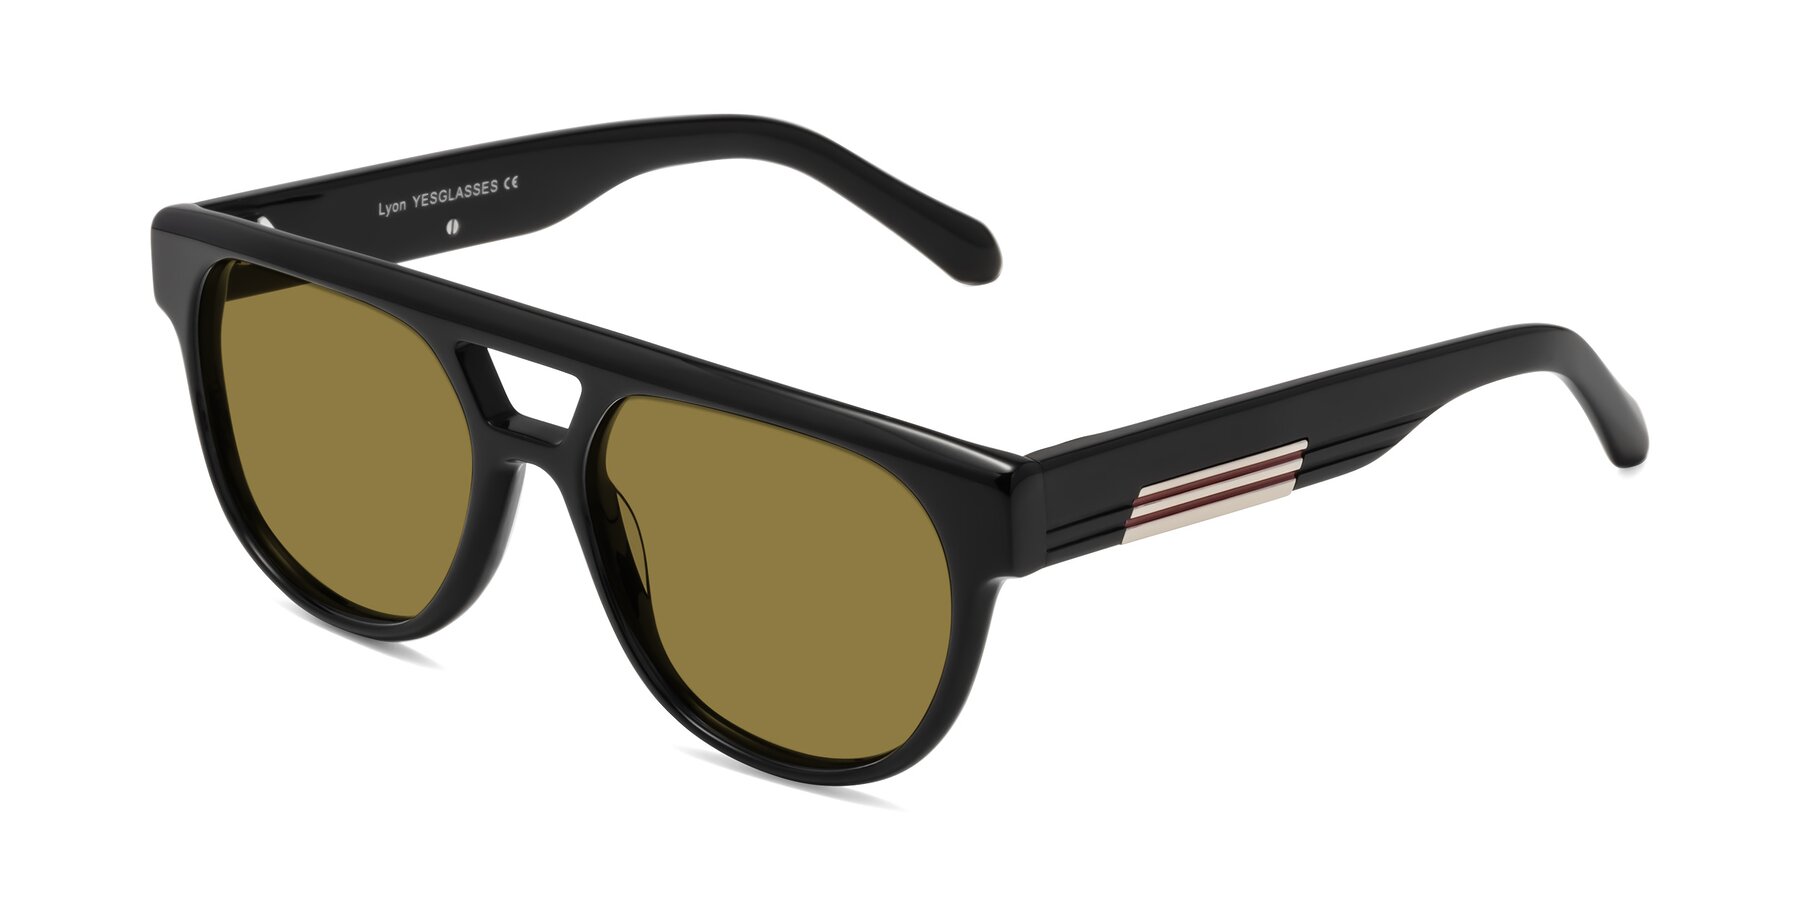 Angle of Lyon in Black with Brown Polarized Lenses